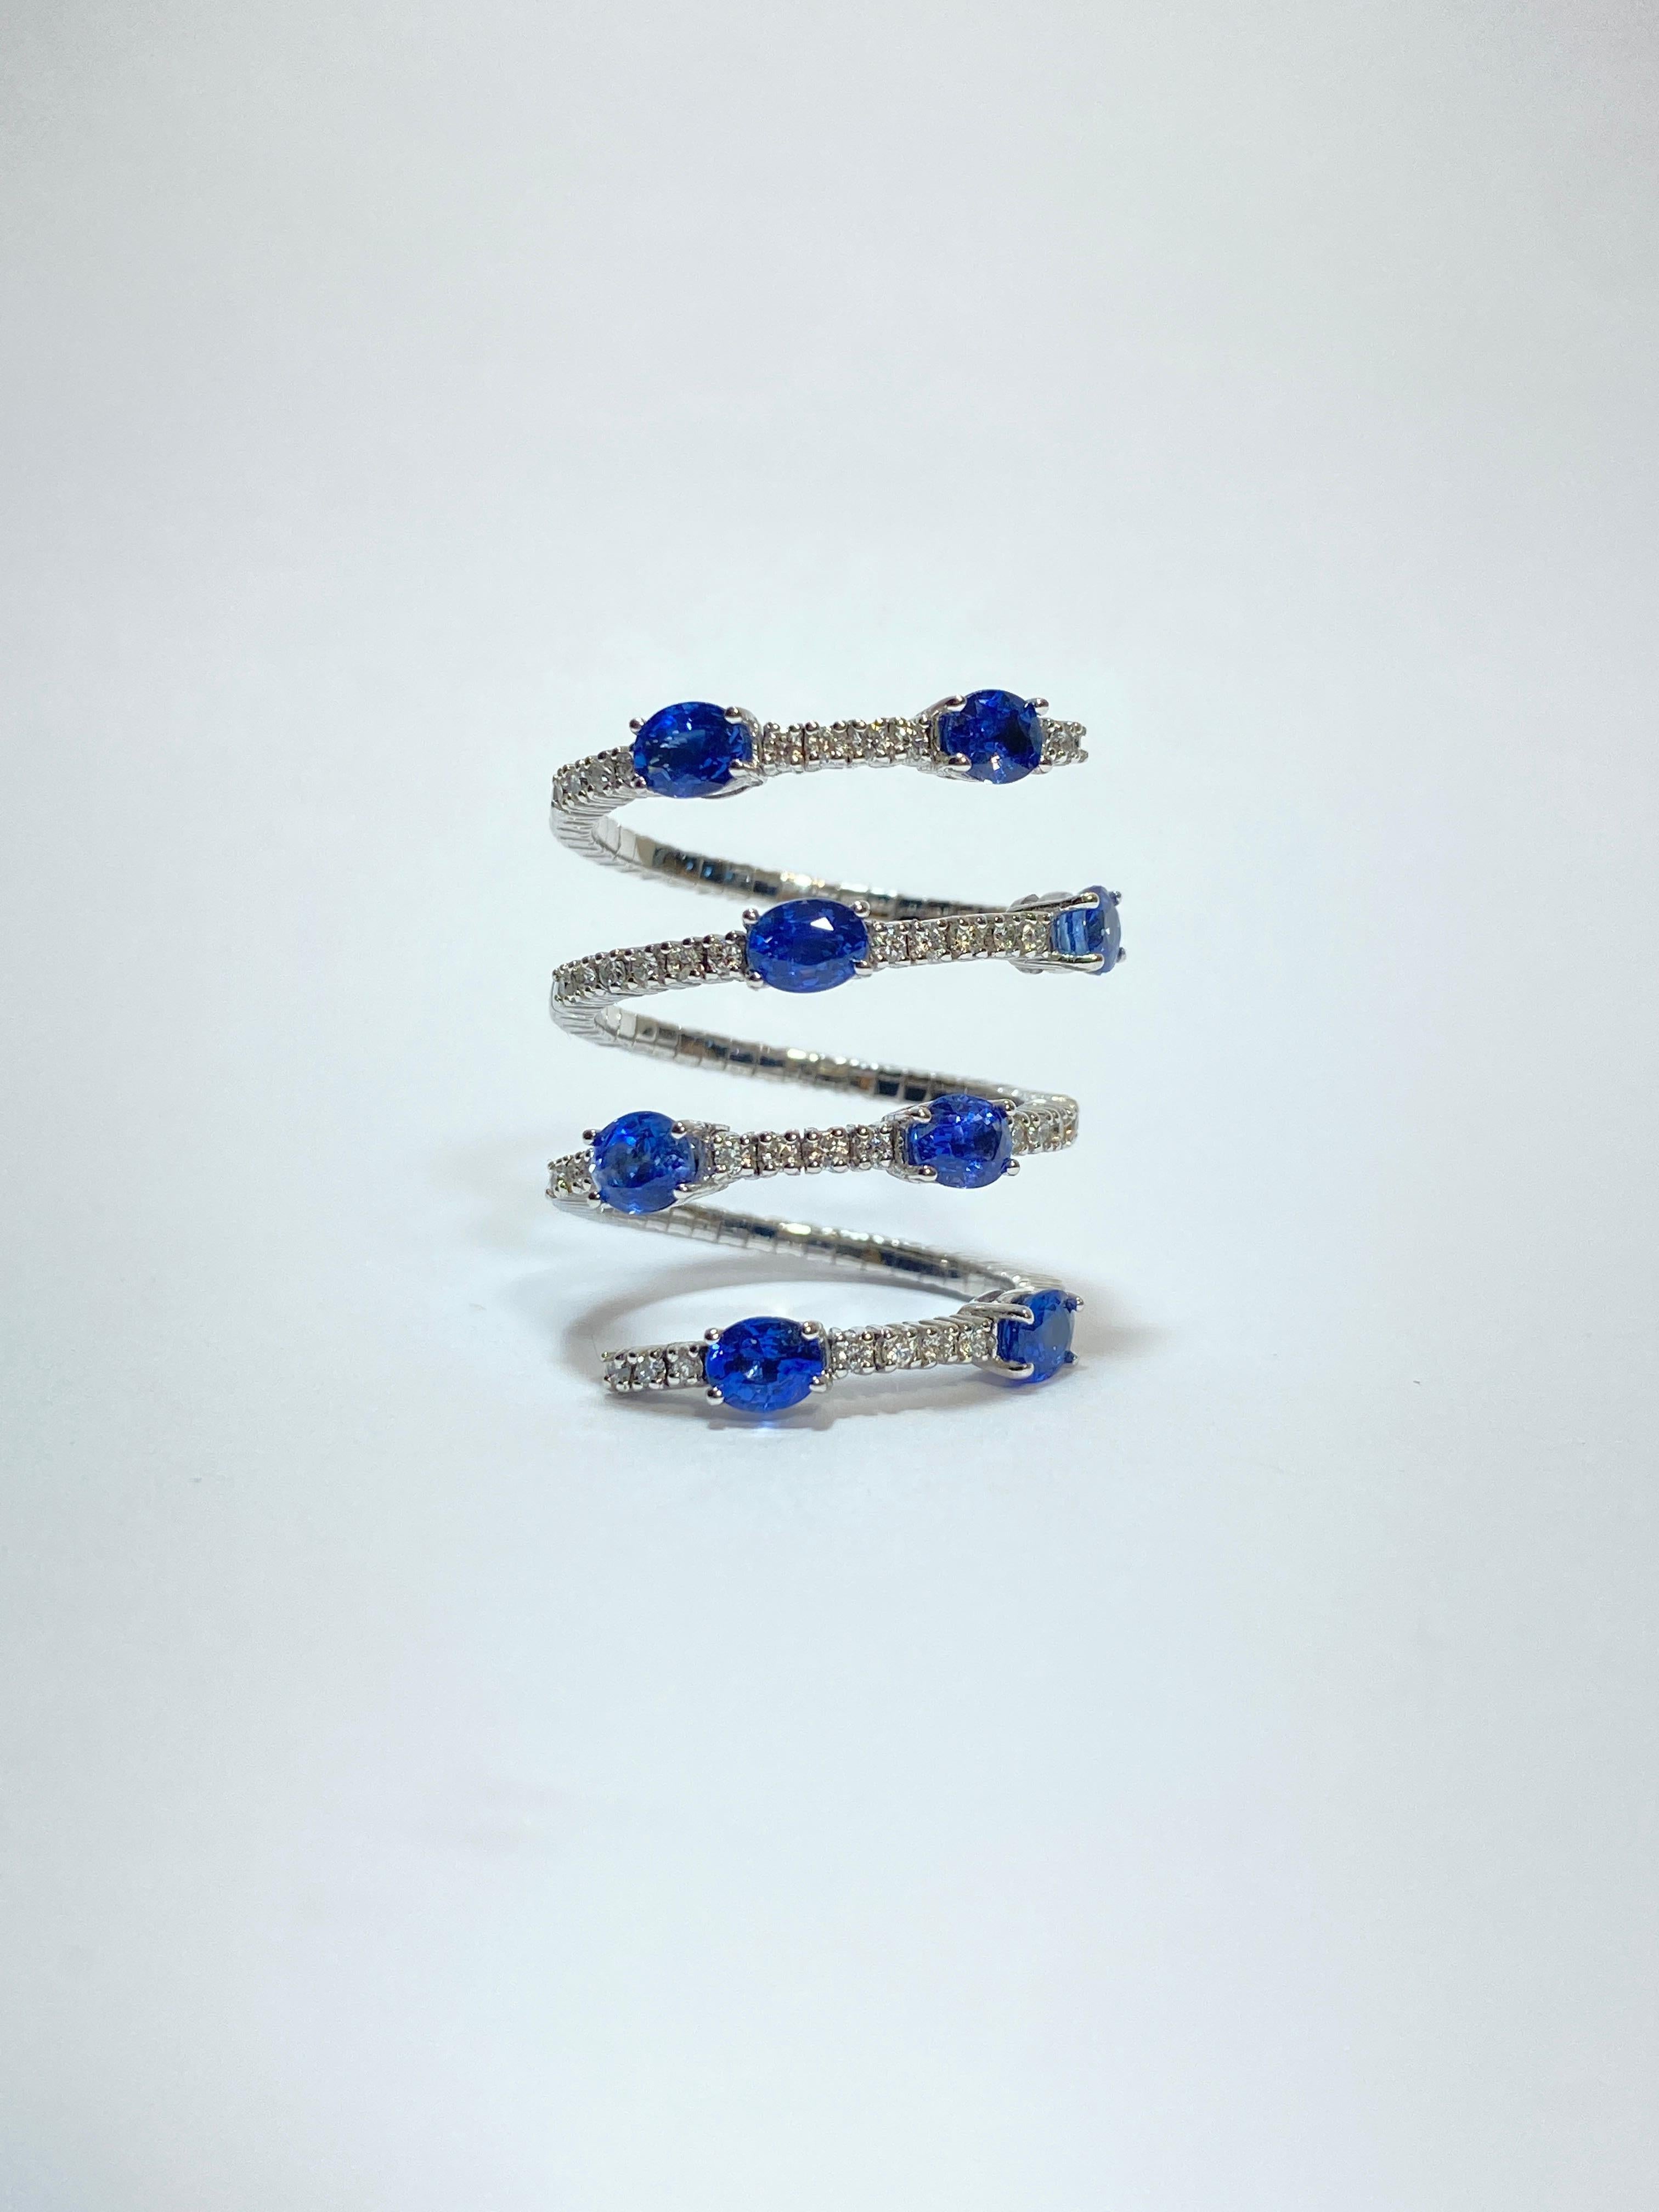 Jewel inspired by the sinuous movements of the snake.
This ring has an elastic structure made in 18 Kt white gold ( gr.6.20 ) and it's embellished with four rows of white diamonds (ct 0.49) and eight oval cut blue Sapphires  (ct 2.42) to create an